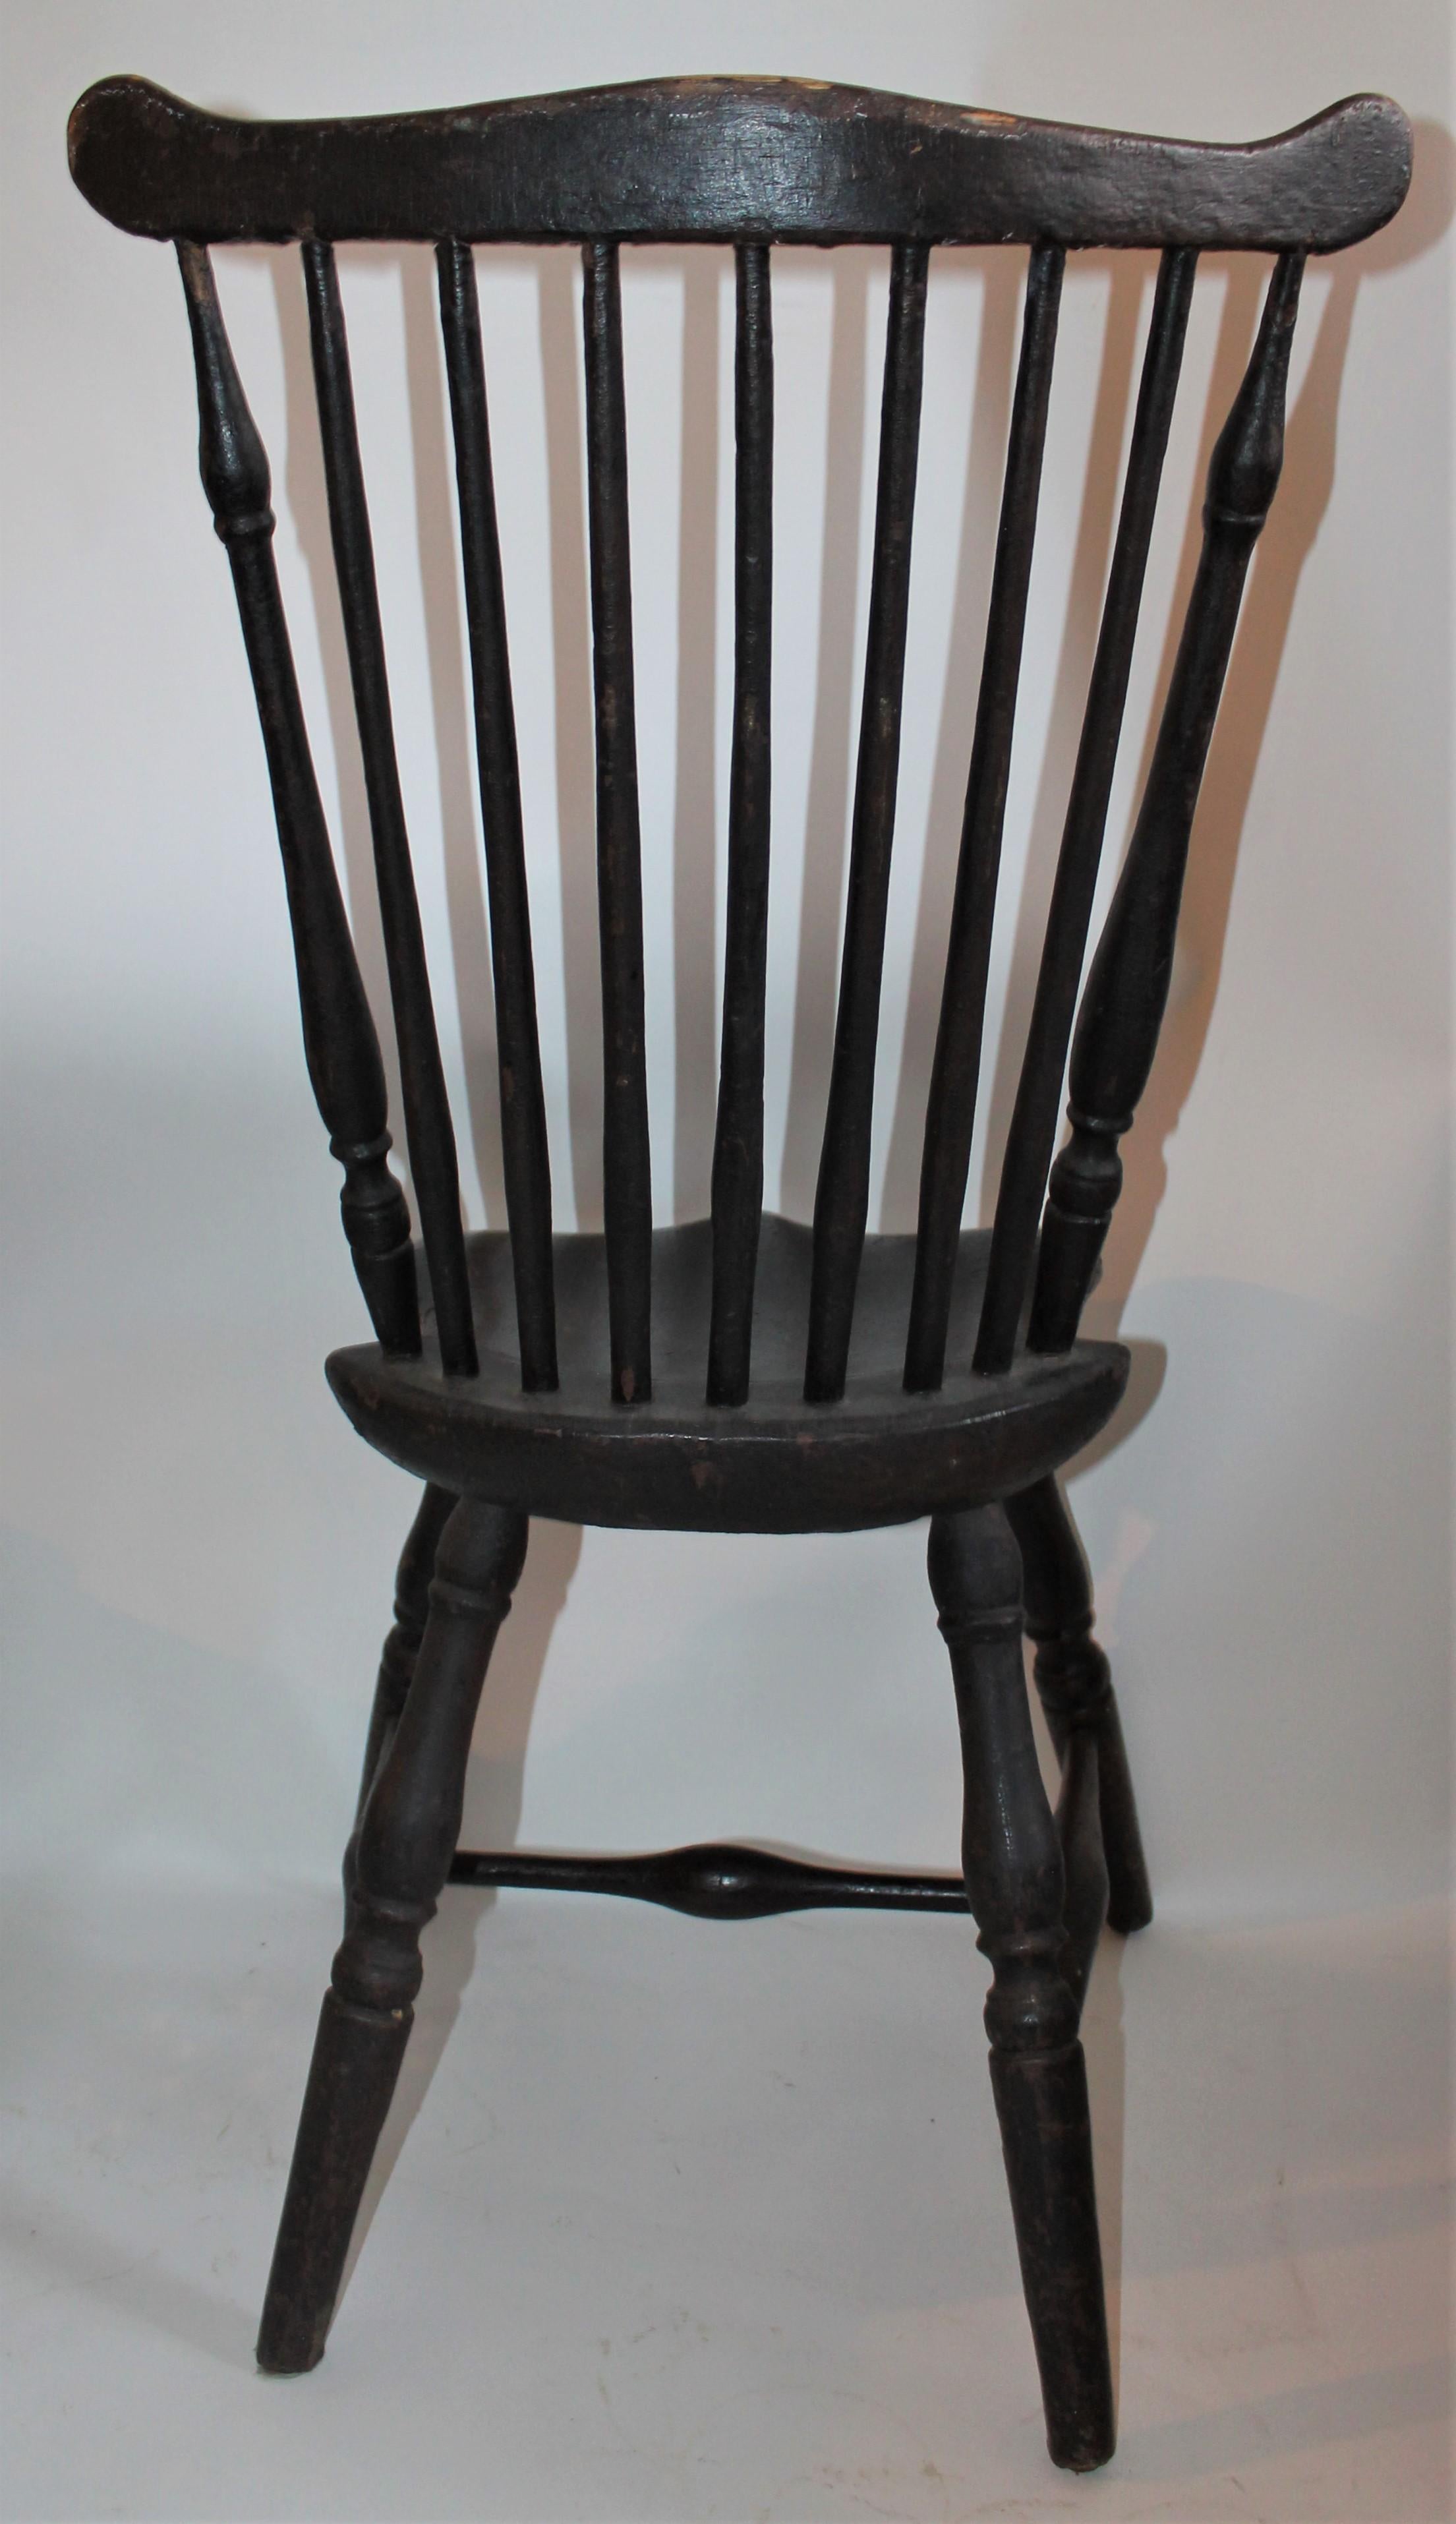 American 18th Century Connecticut River Valley Windsor Chair